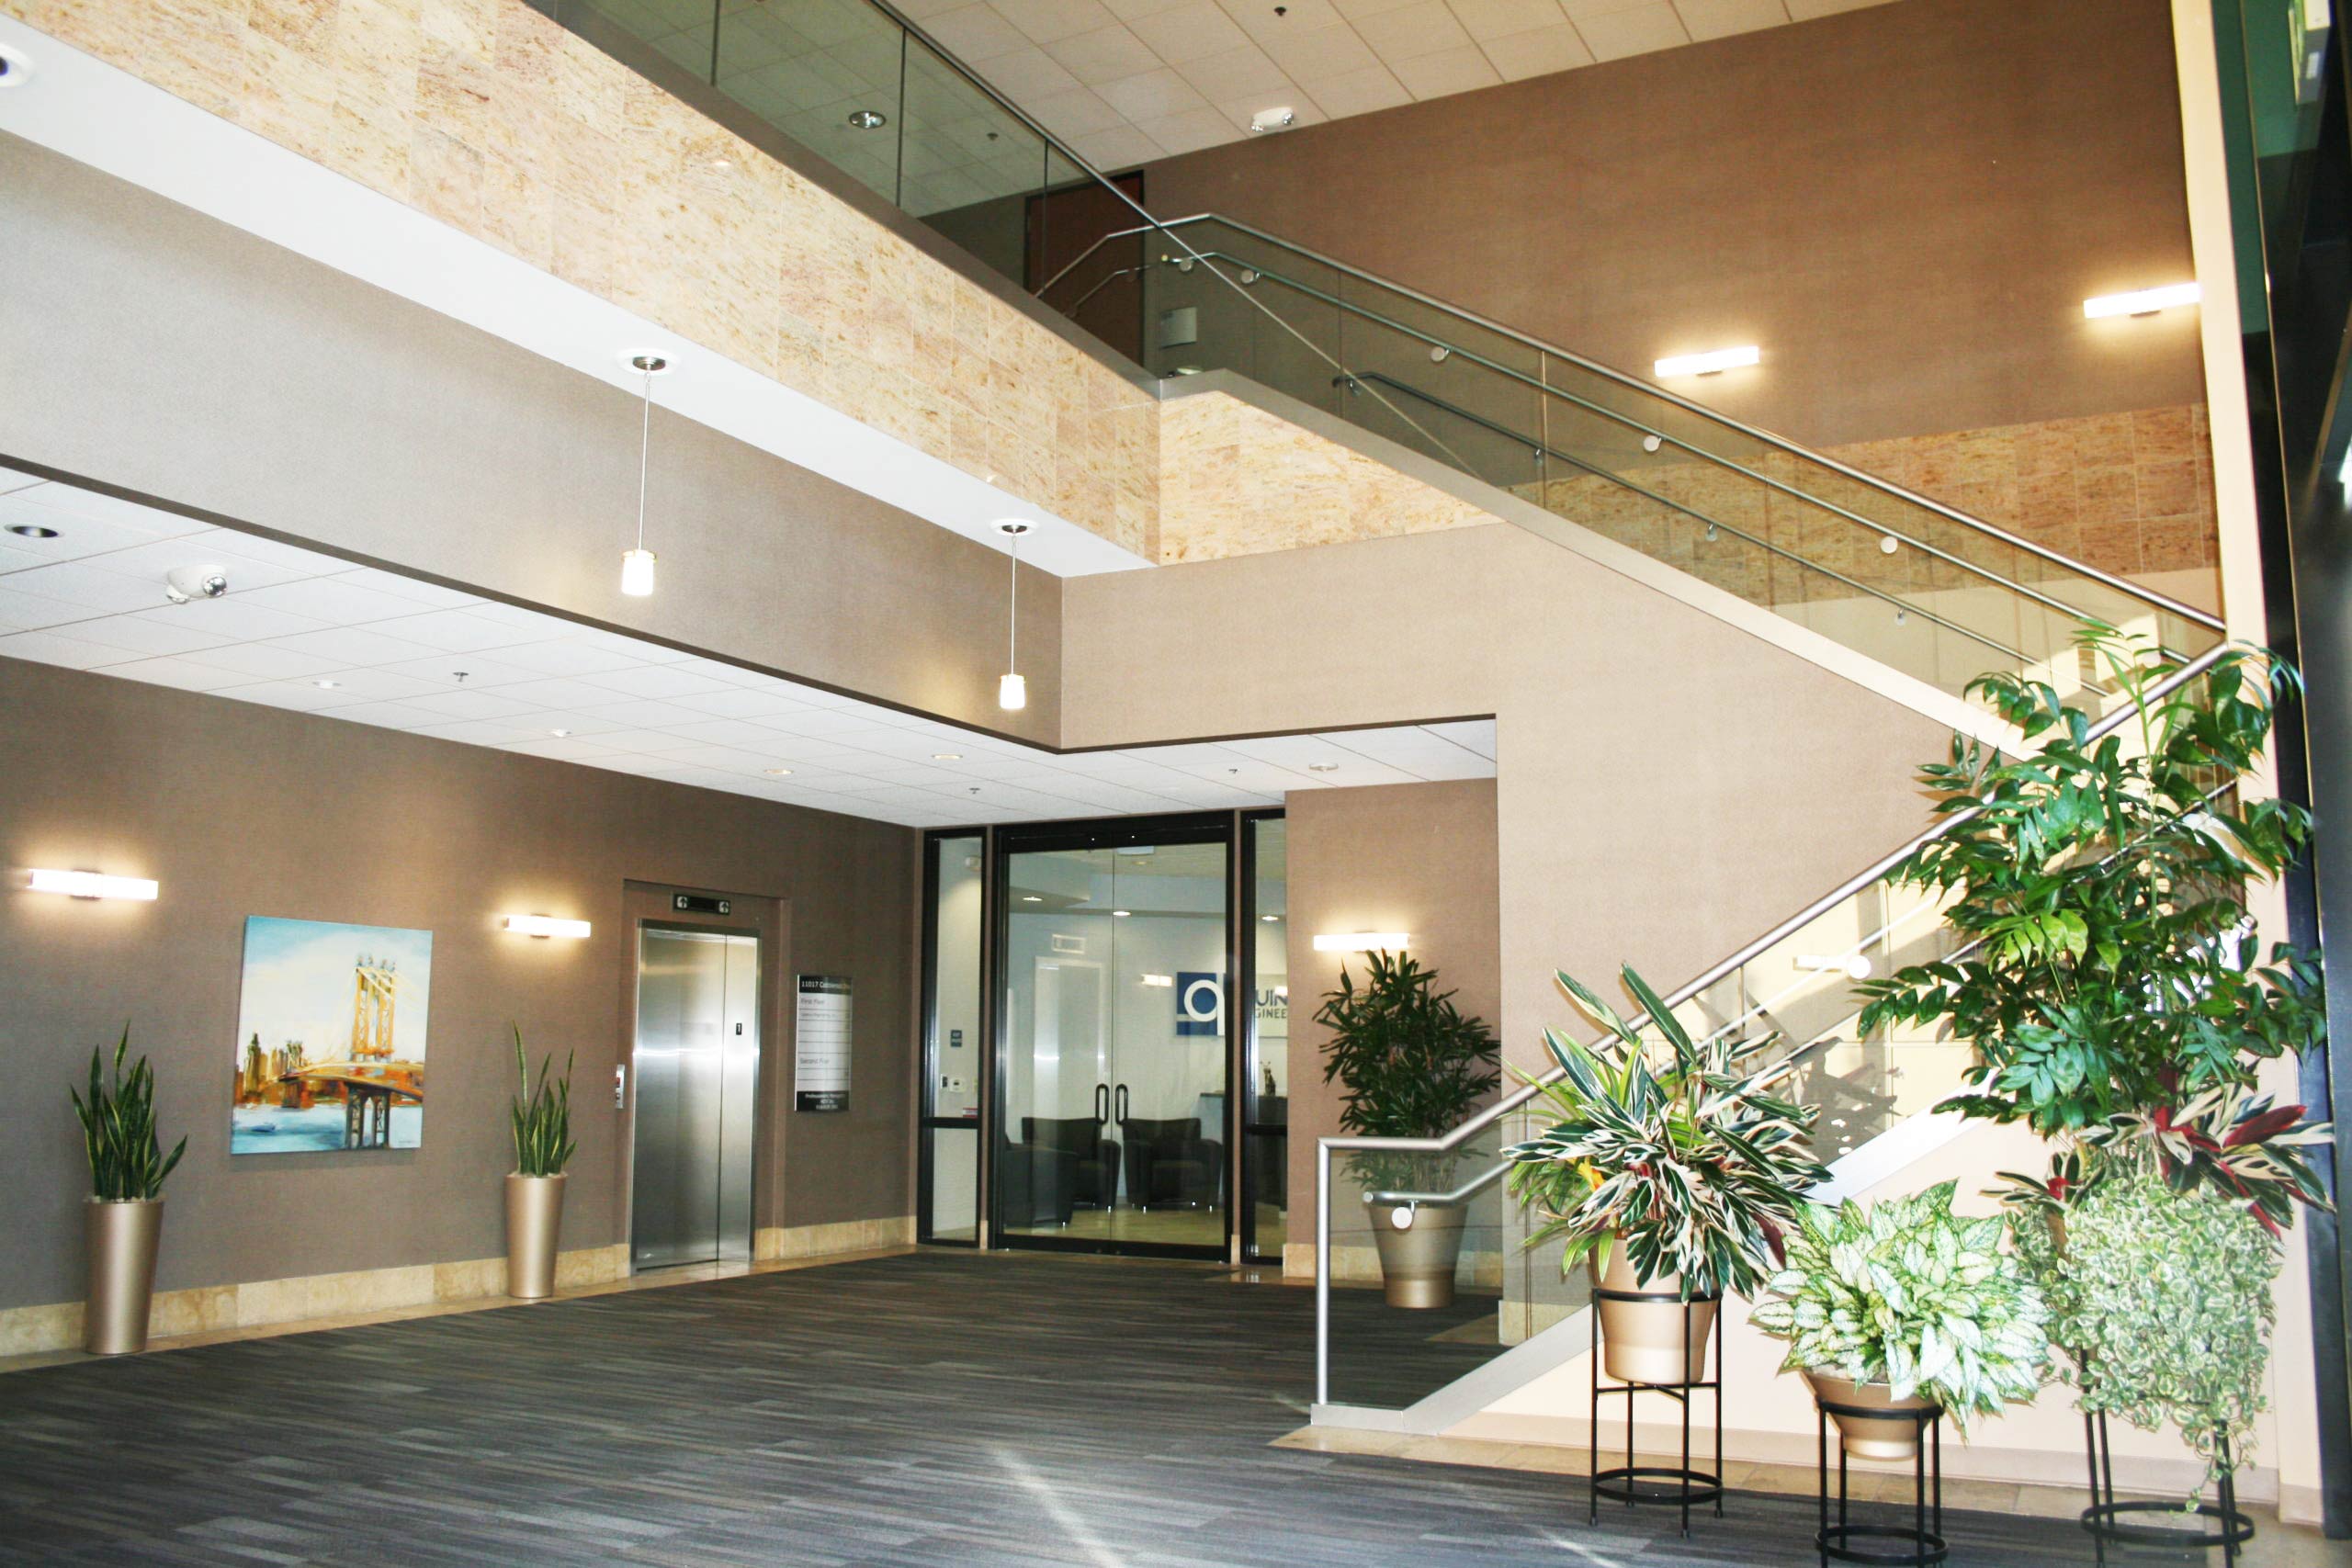 Lobby of KCM Commercial Property Management in Rancho Cordova, CA